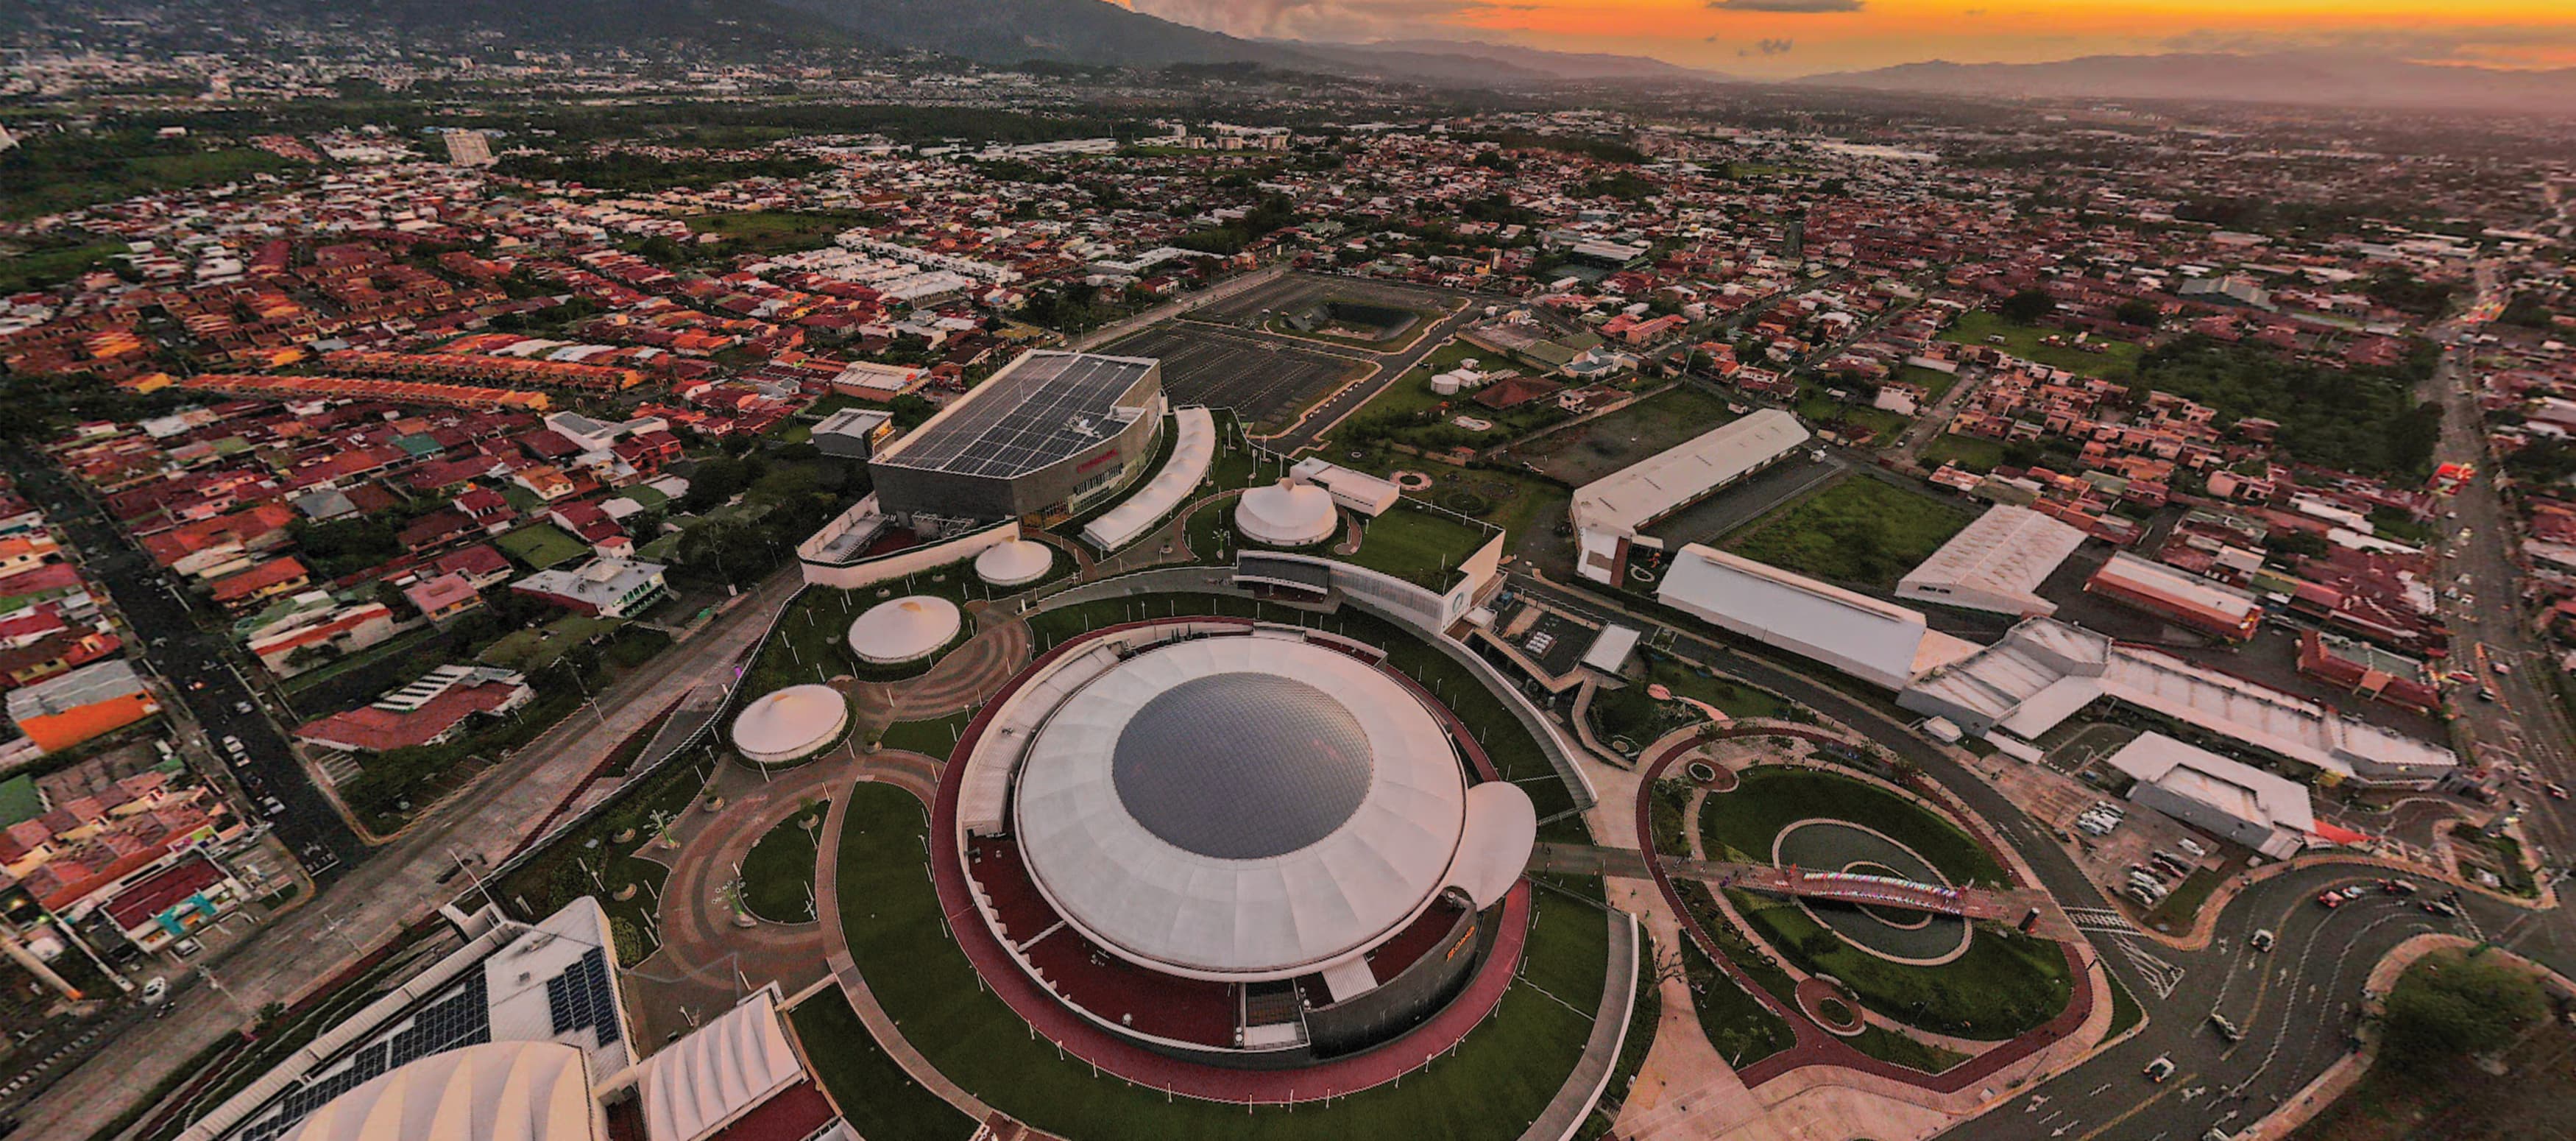 An aerial image of Oxígeno, a project located in Costa Rica inspired by the vision of creating a "Human Playground".